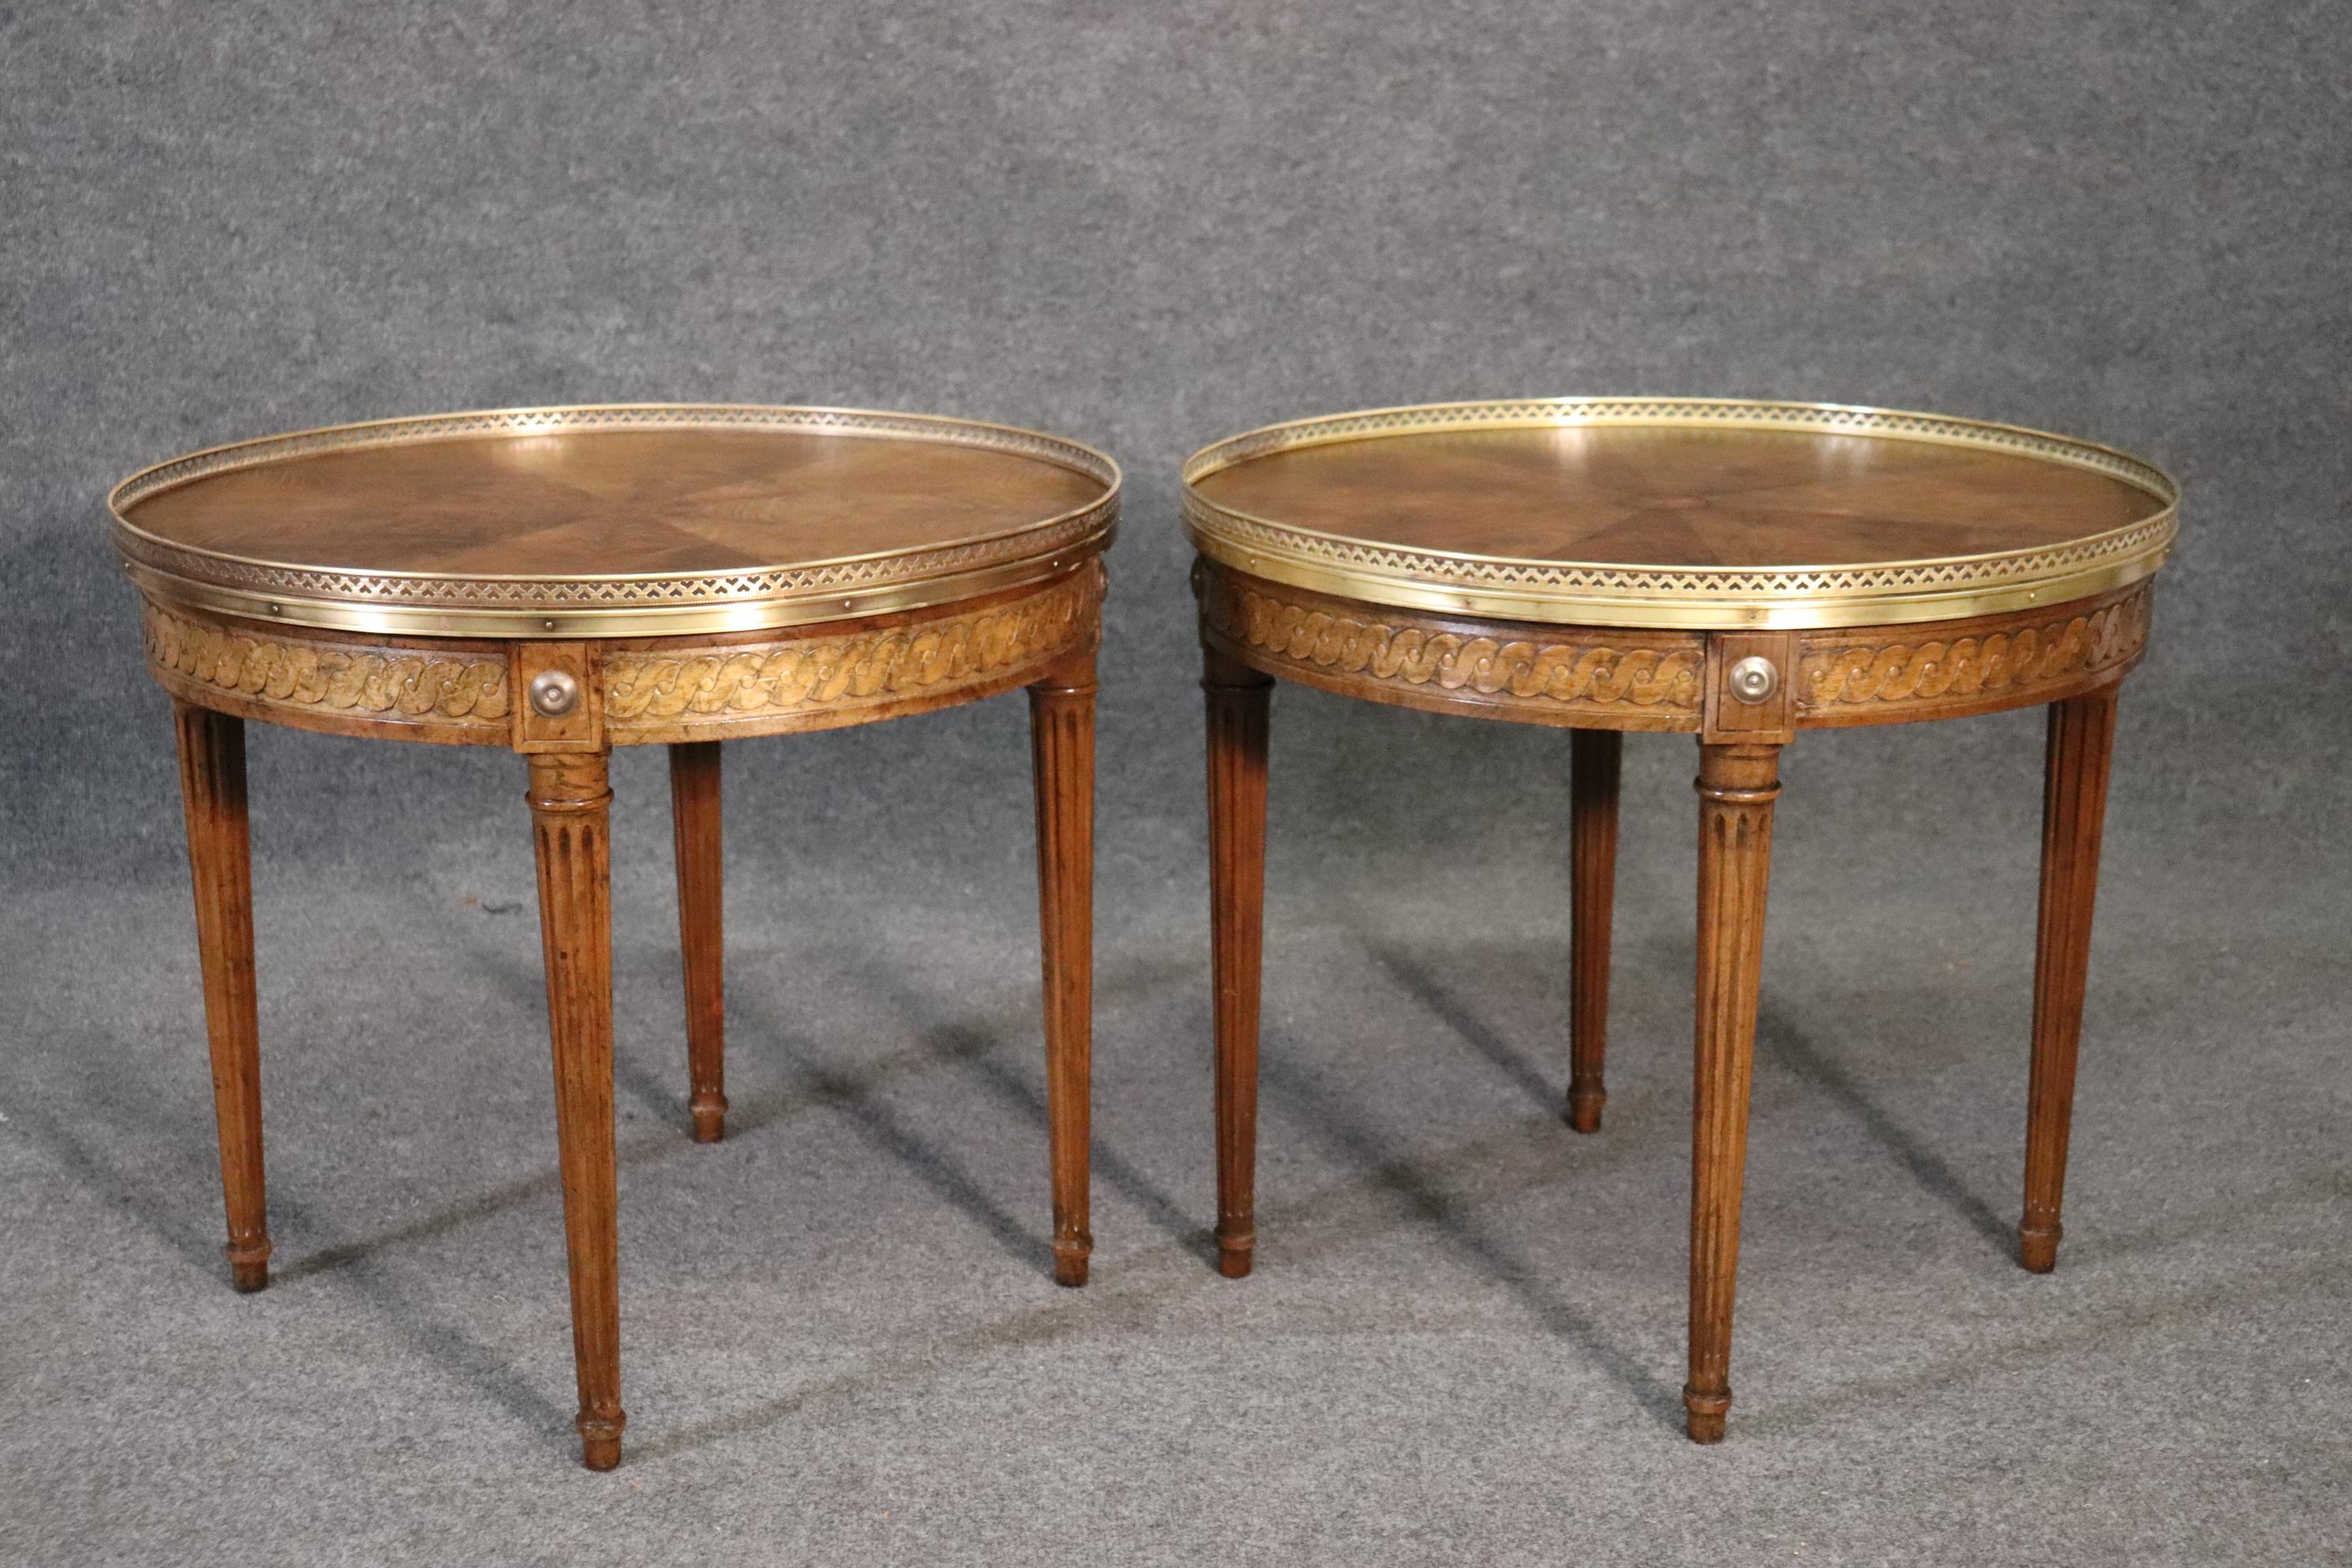 These are absolutely beautiful end tables from Baker furniture. The tables are in very good condition and have no major issues of any kind. The tables are beautifully designed with expertly carved walnut frames and beautiful walnut marquetry on top,